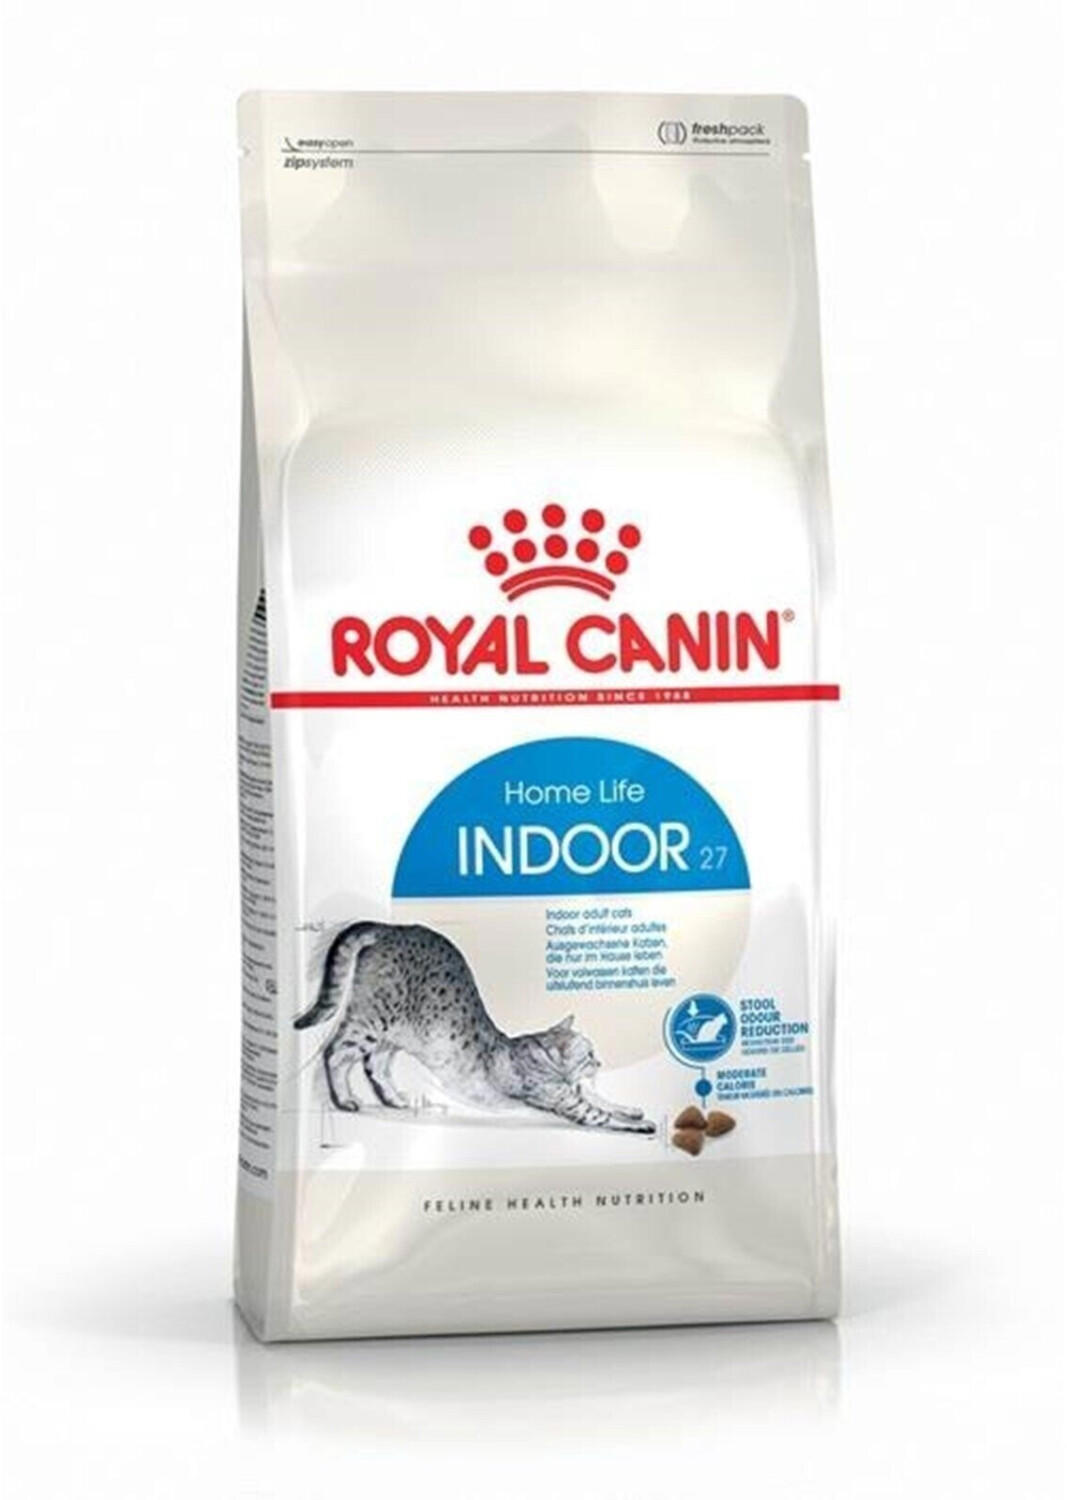 Royal Canin Home Life Indoor 27 Dry